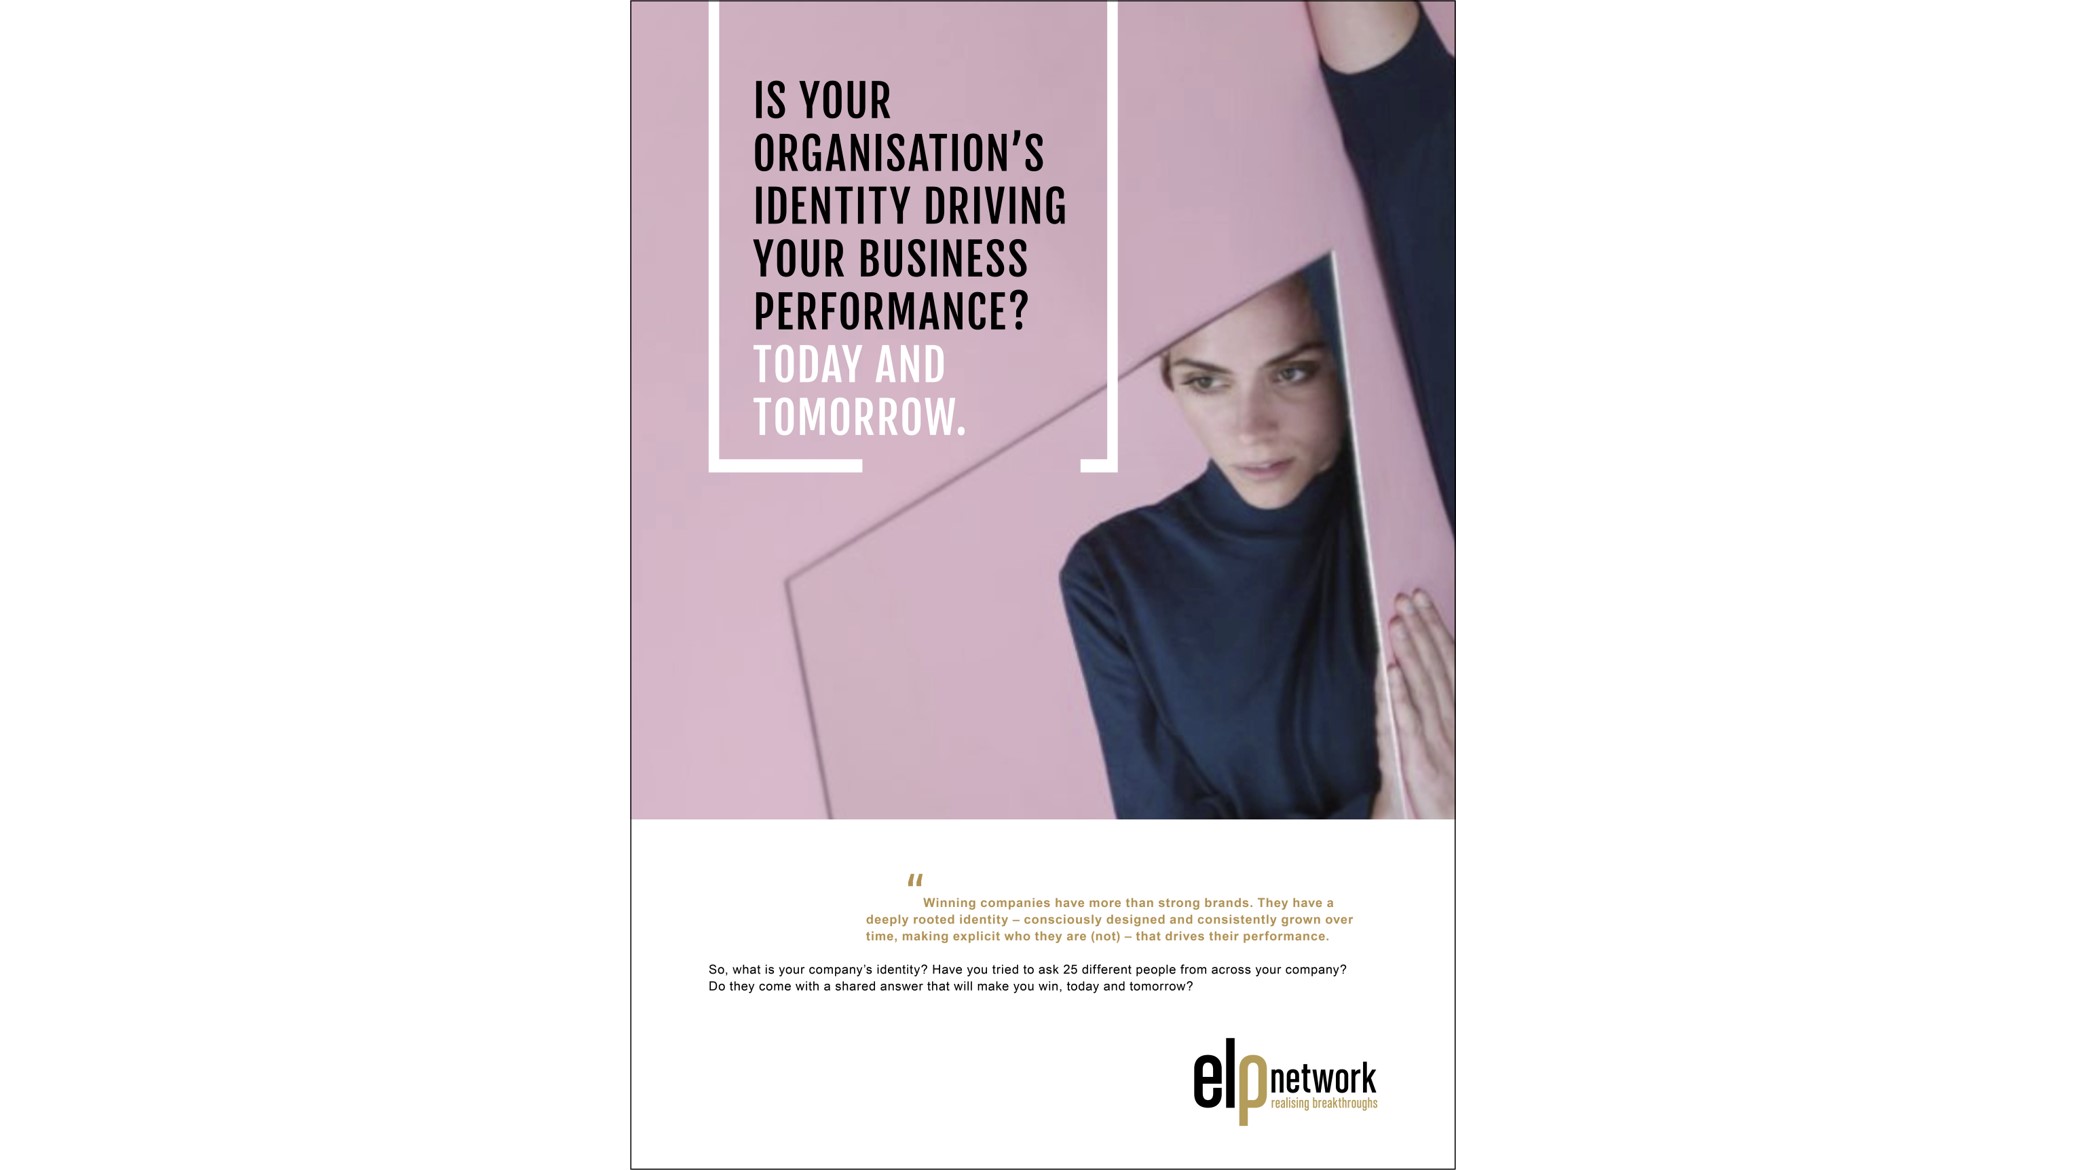 Is your organisation's identity driving your business performance